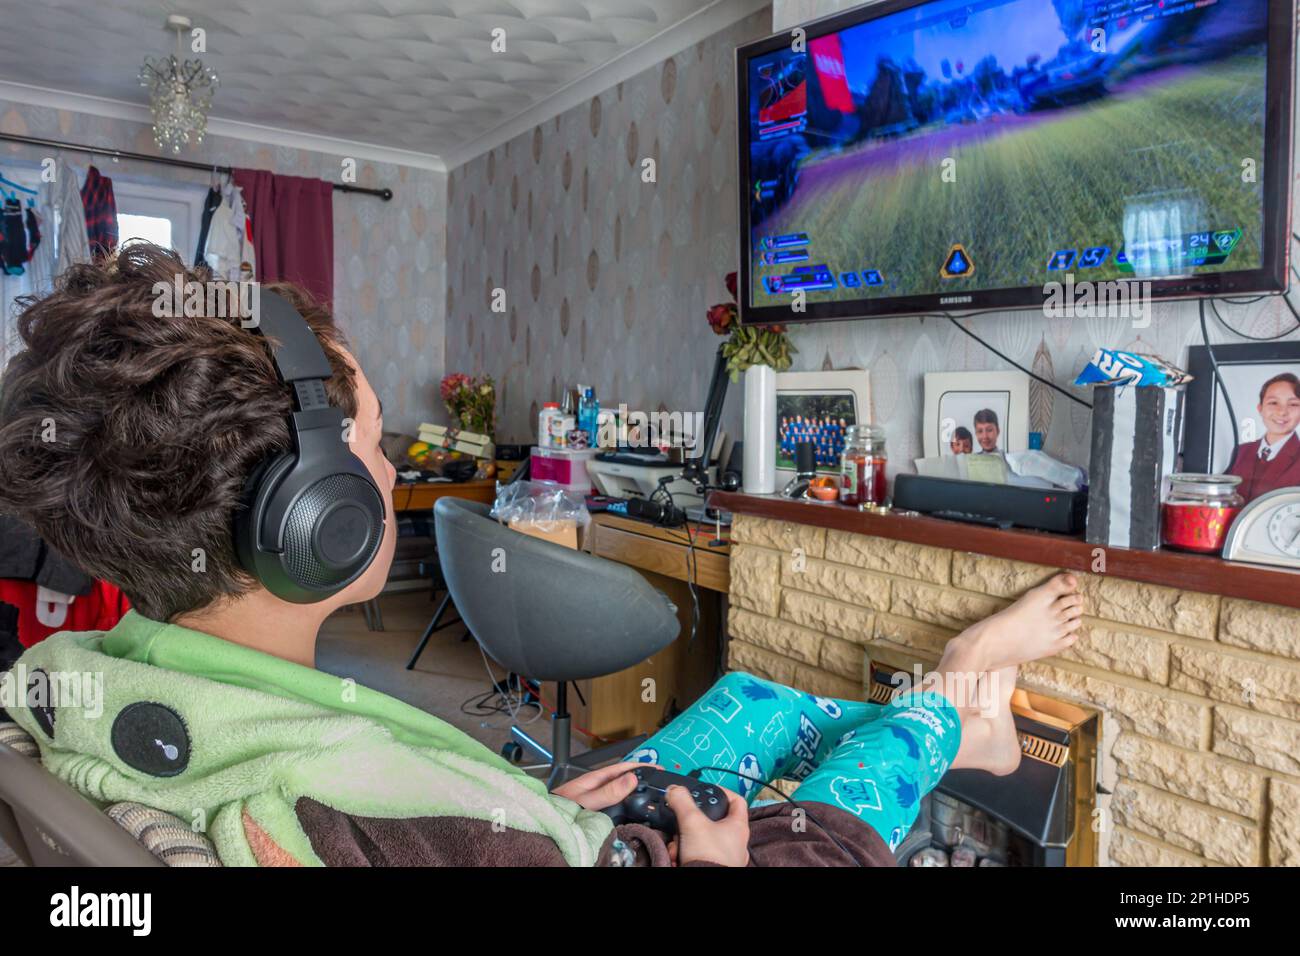 A teenage boy playing the APEX Legends video game on a gaming console attached to a television in the lounge Stock Photo